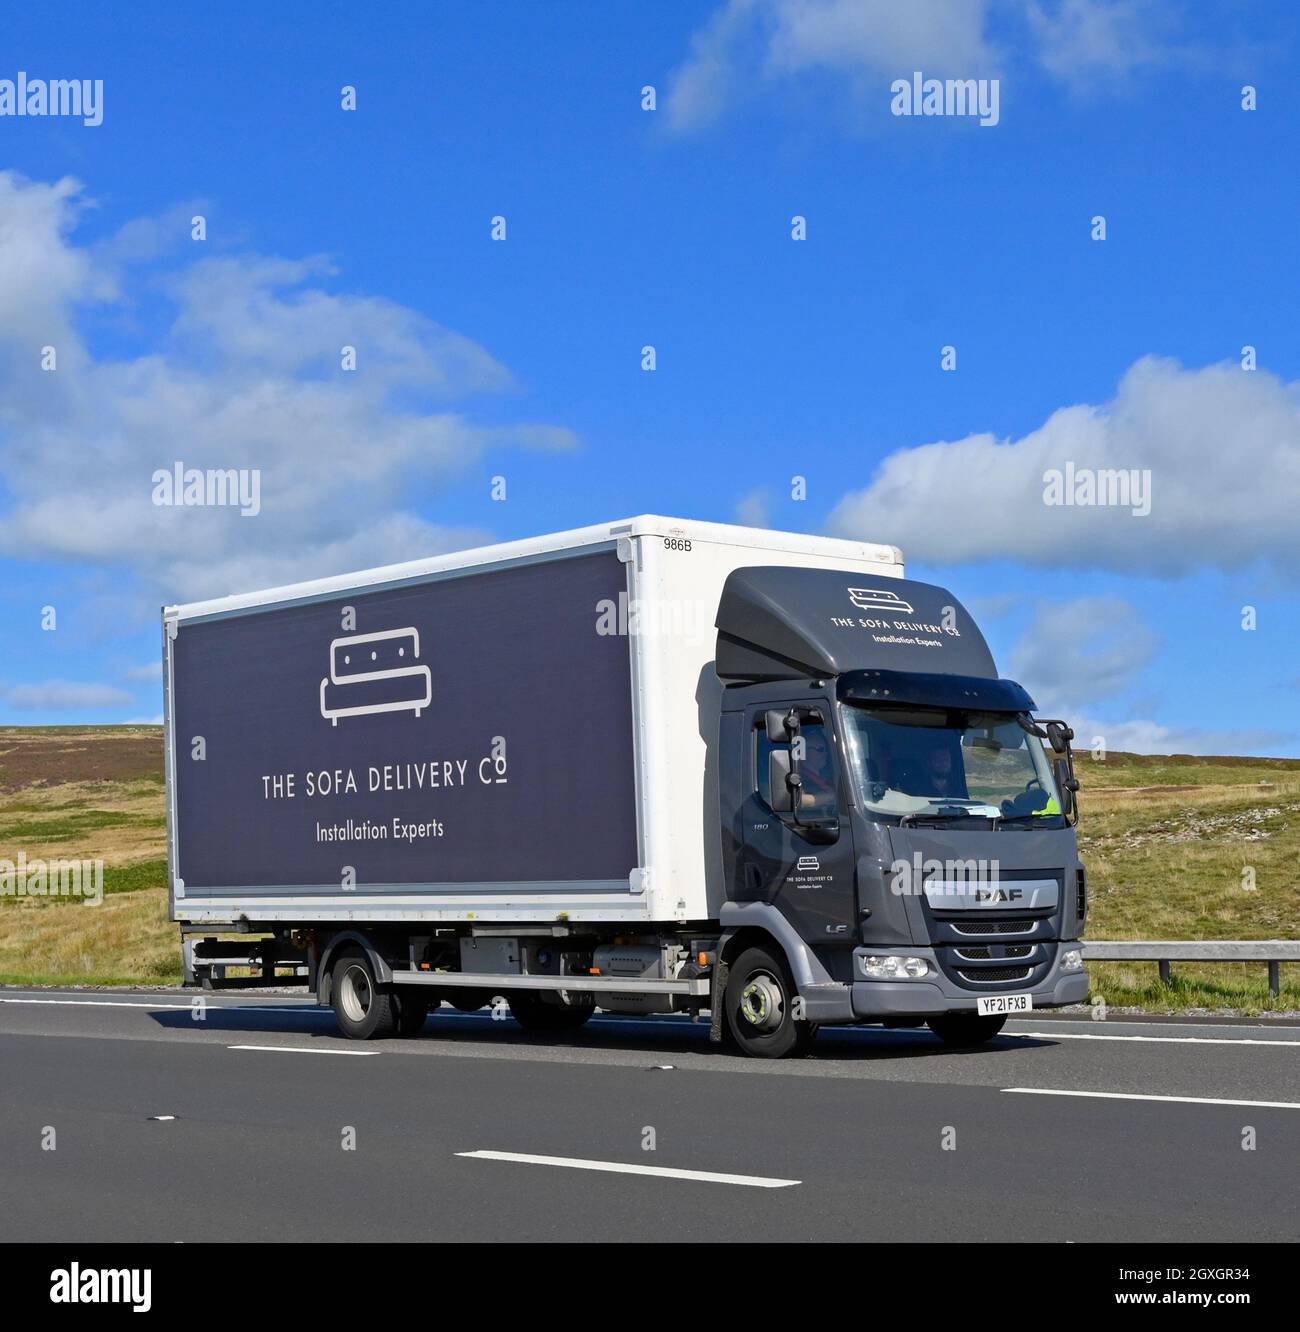 Goods Vehicle. The Sofa Delivery Company Limited. Installation experts.  M6 Motorway, Southbound. Shap, Cumbria, England, United Kingdom, Europe. Stock Photo